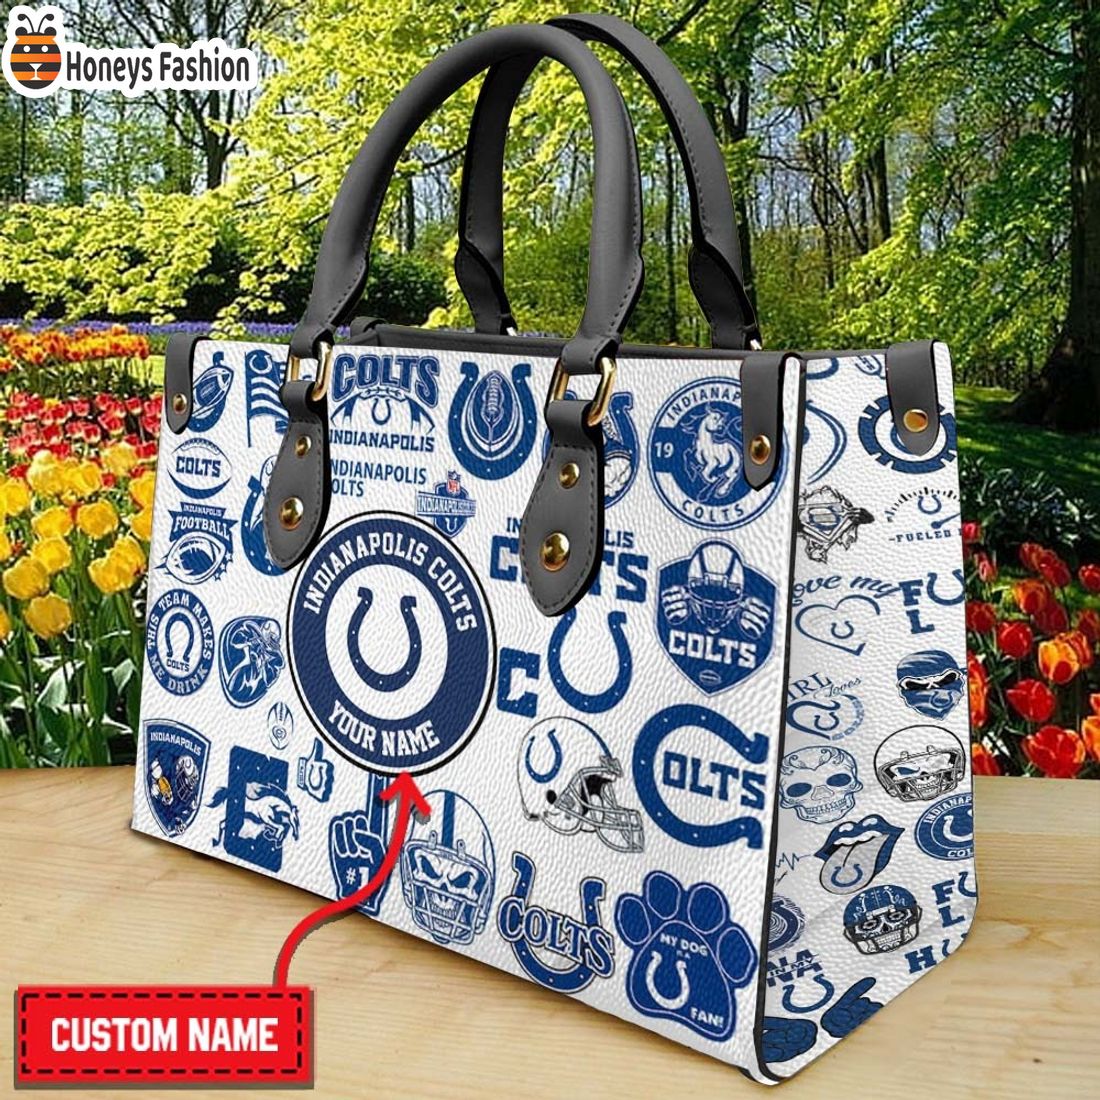 Indianapolis Colts Personalized Leather Handbag